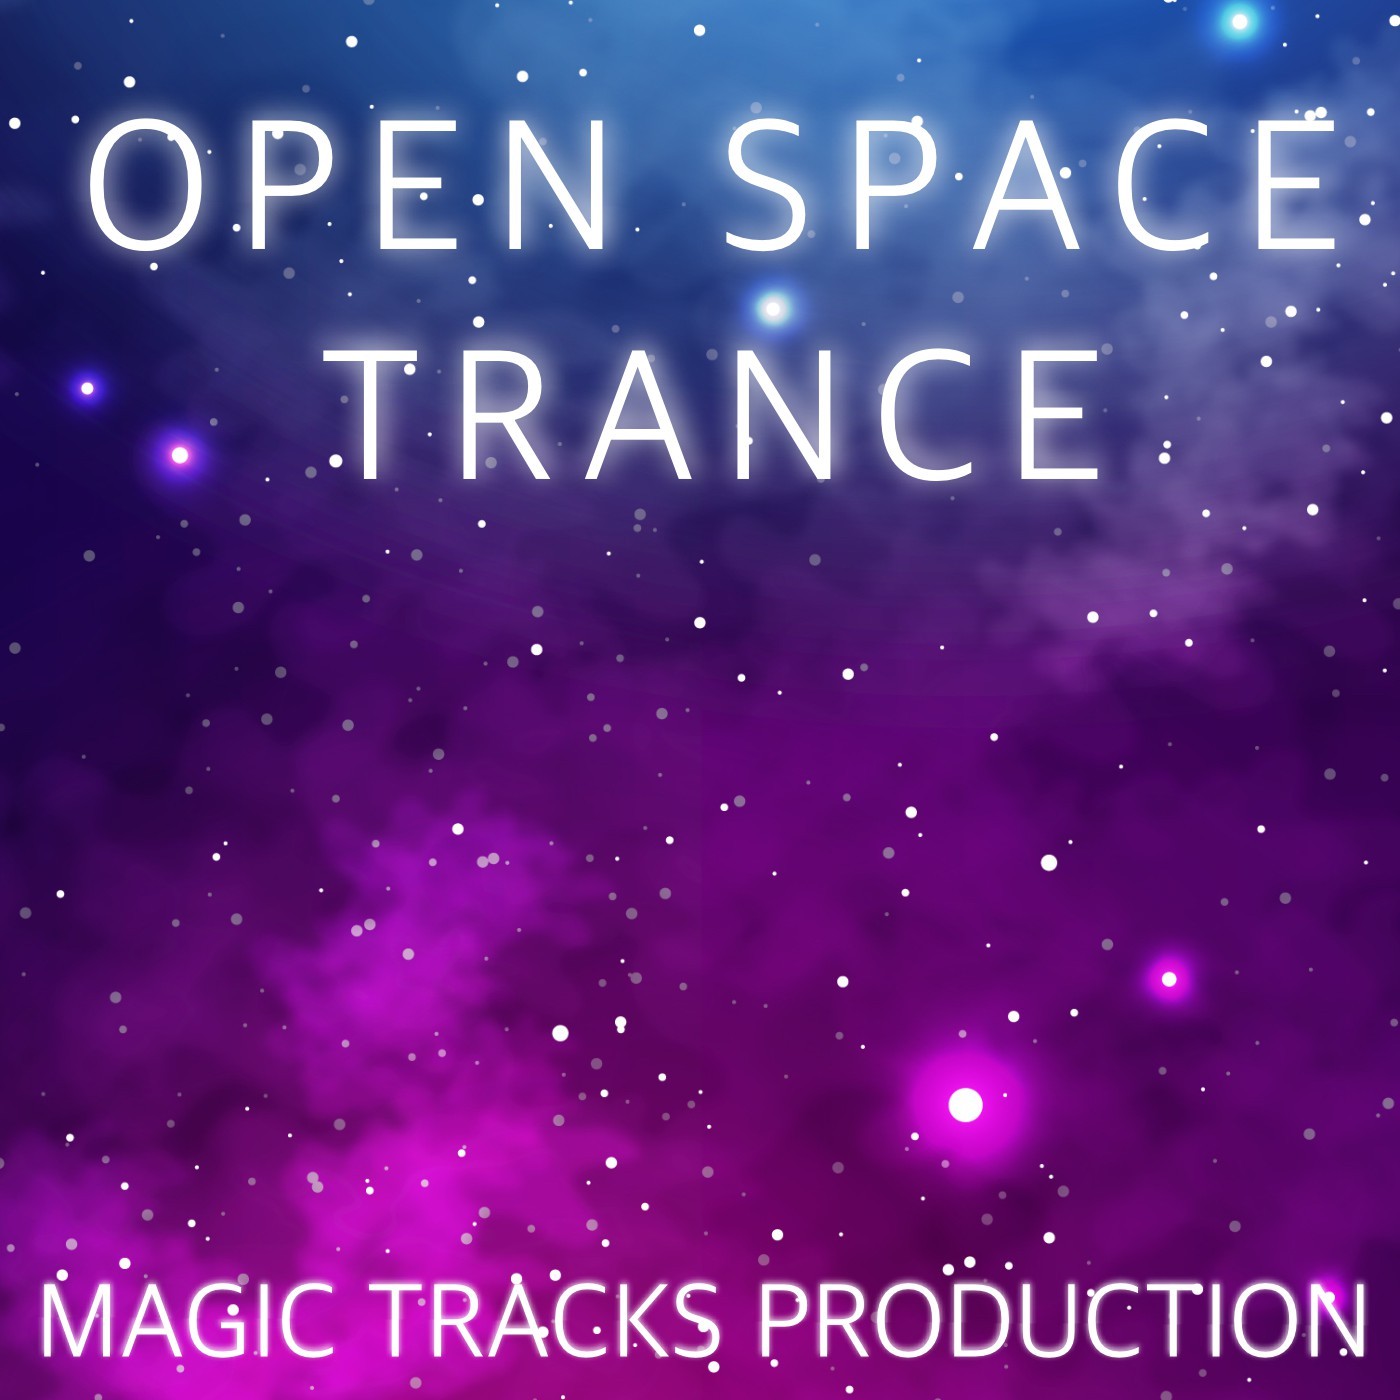 Open Space Trance (Ableton Live Template+Mastering) 